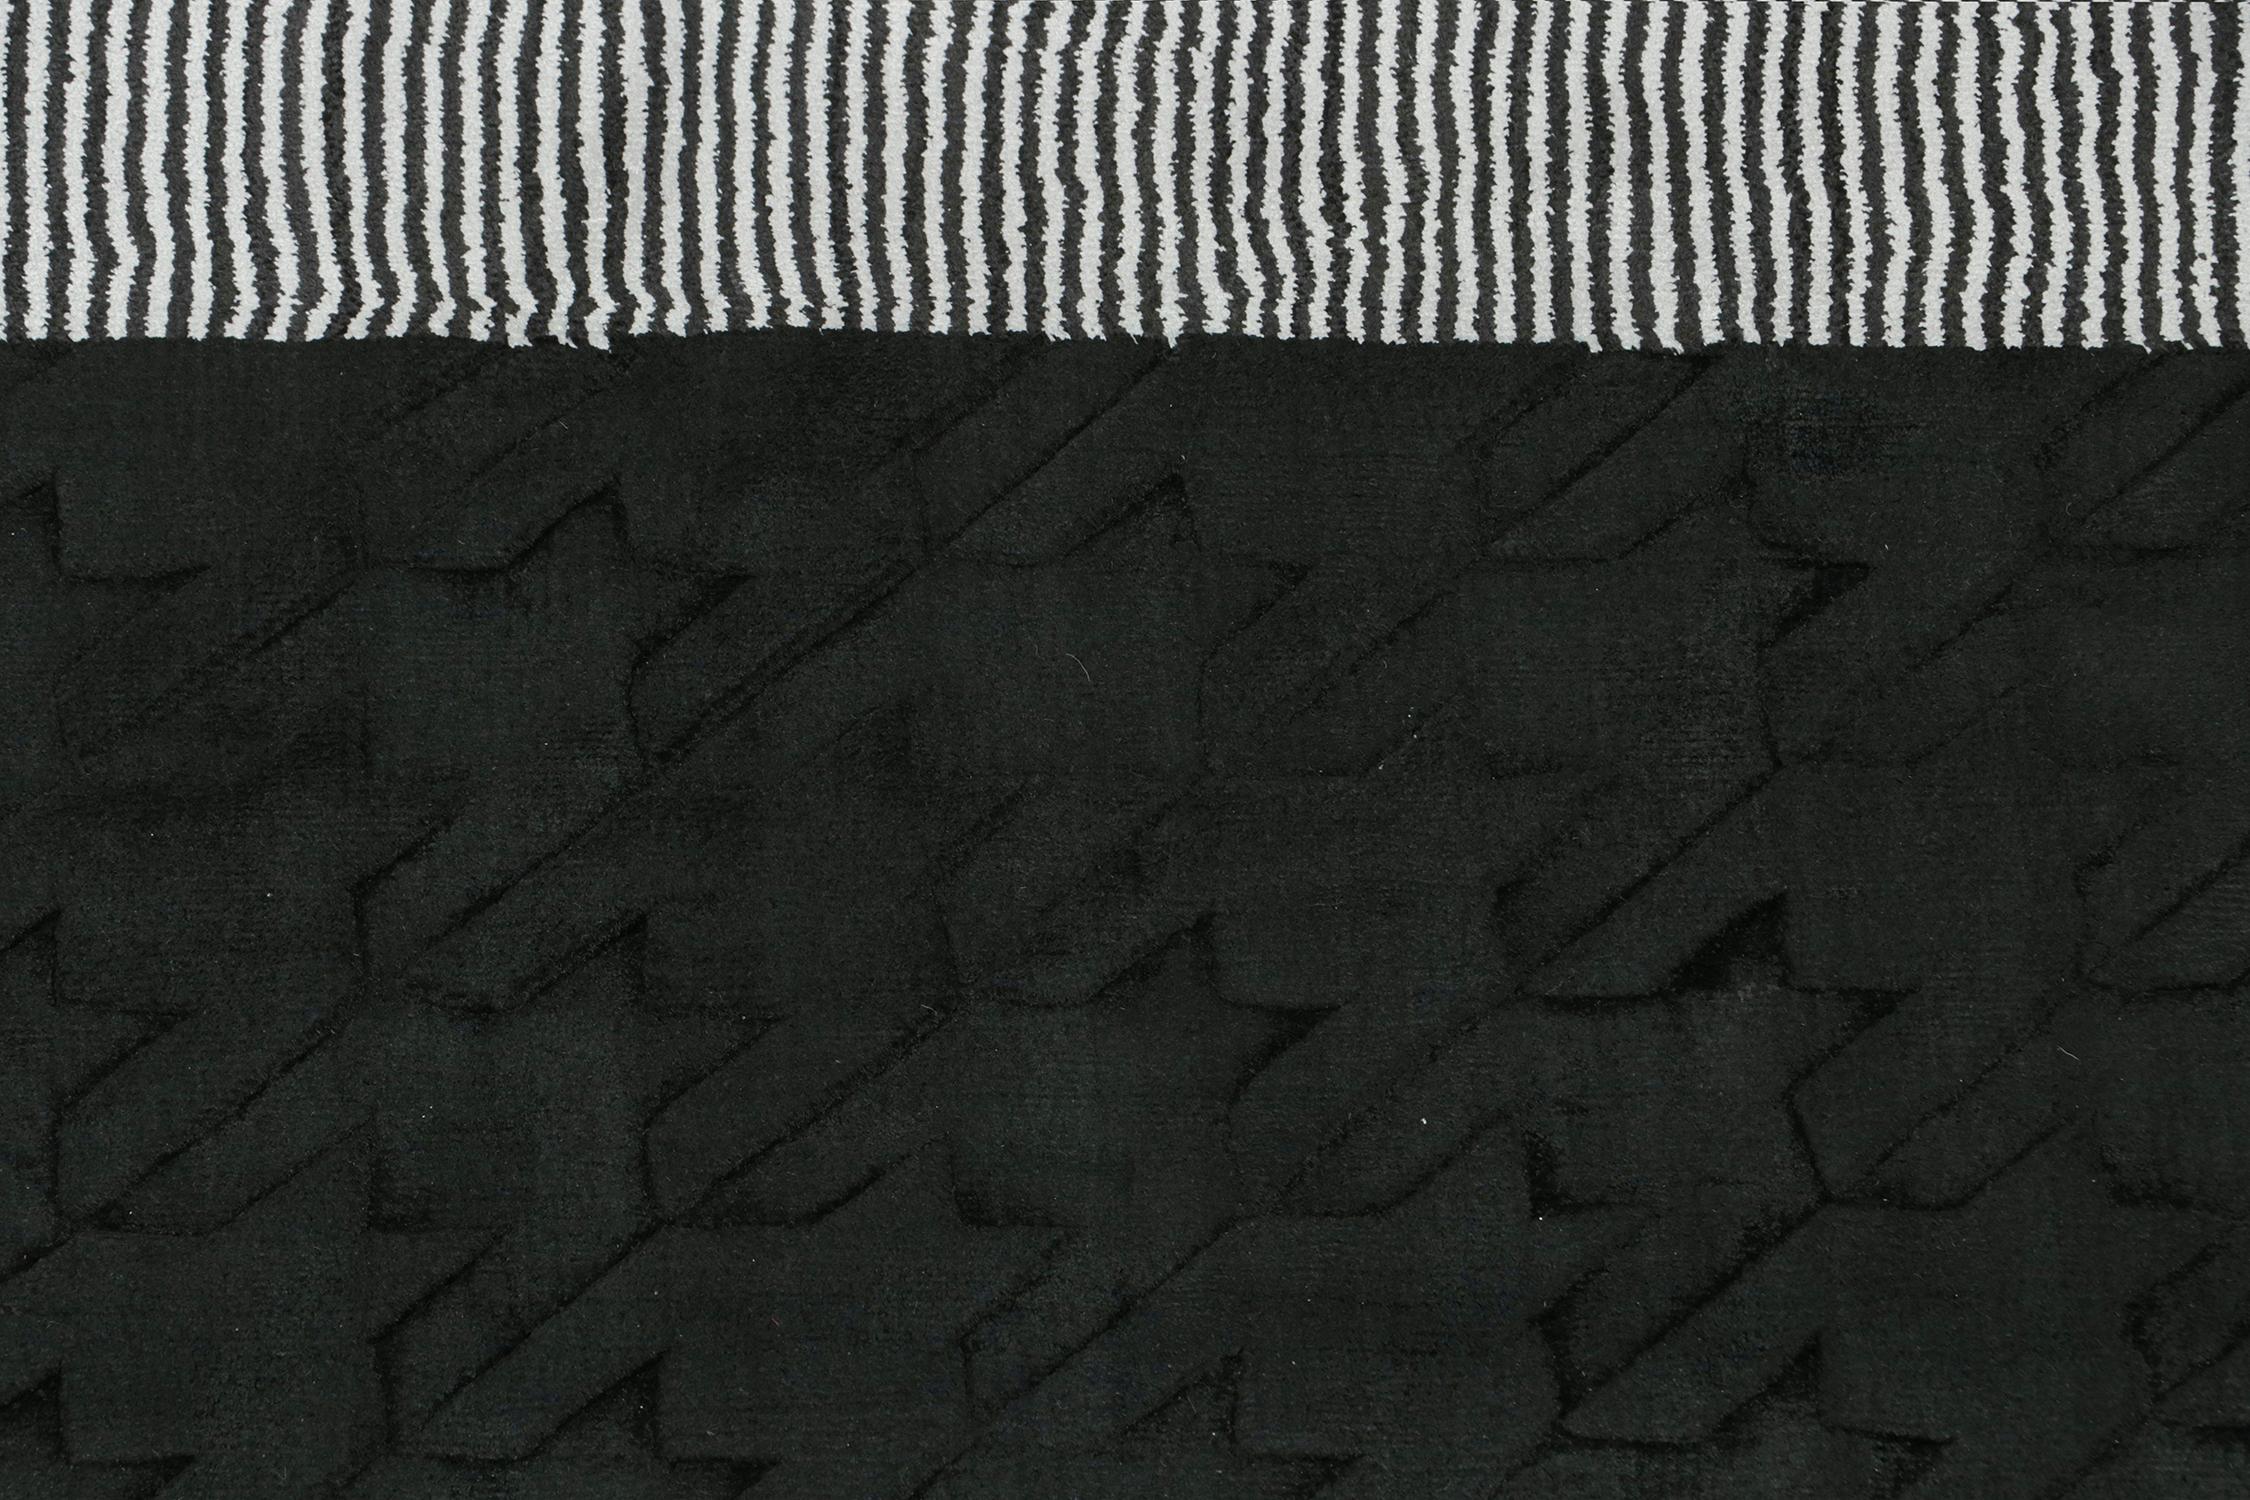 Contemporary Rug & Kilim’s Modern Rug in Black and White Geometric Patterns For Sale